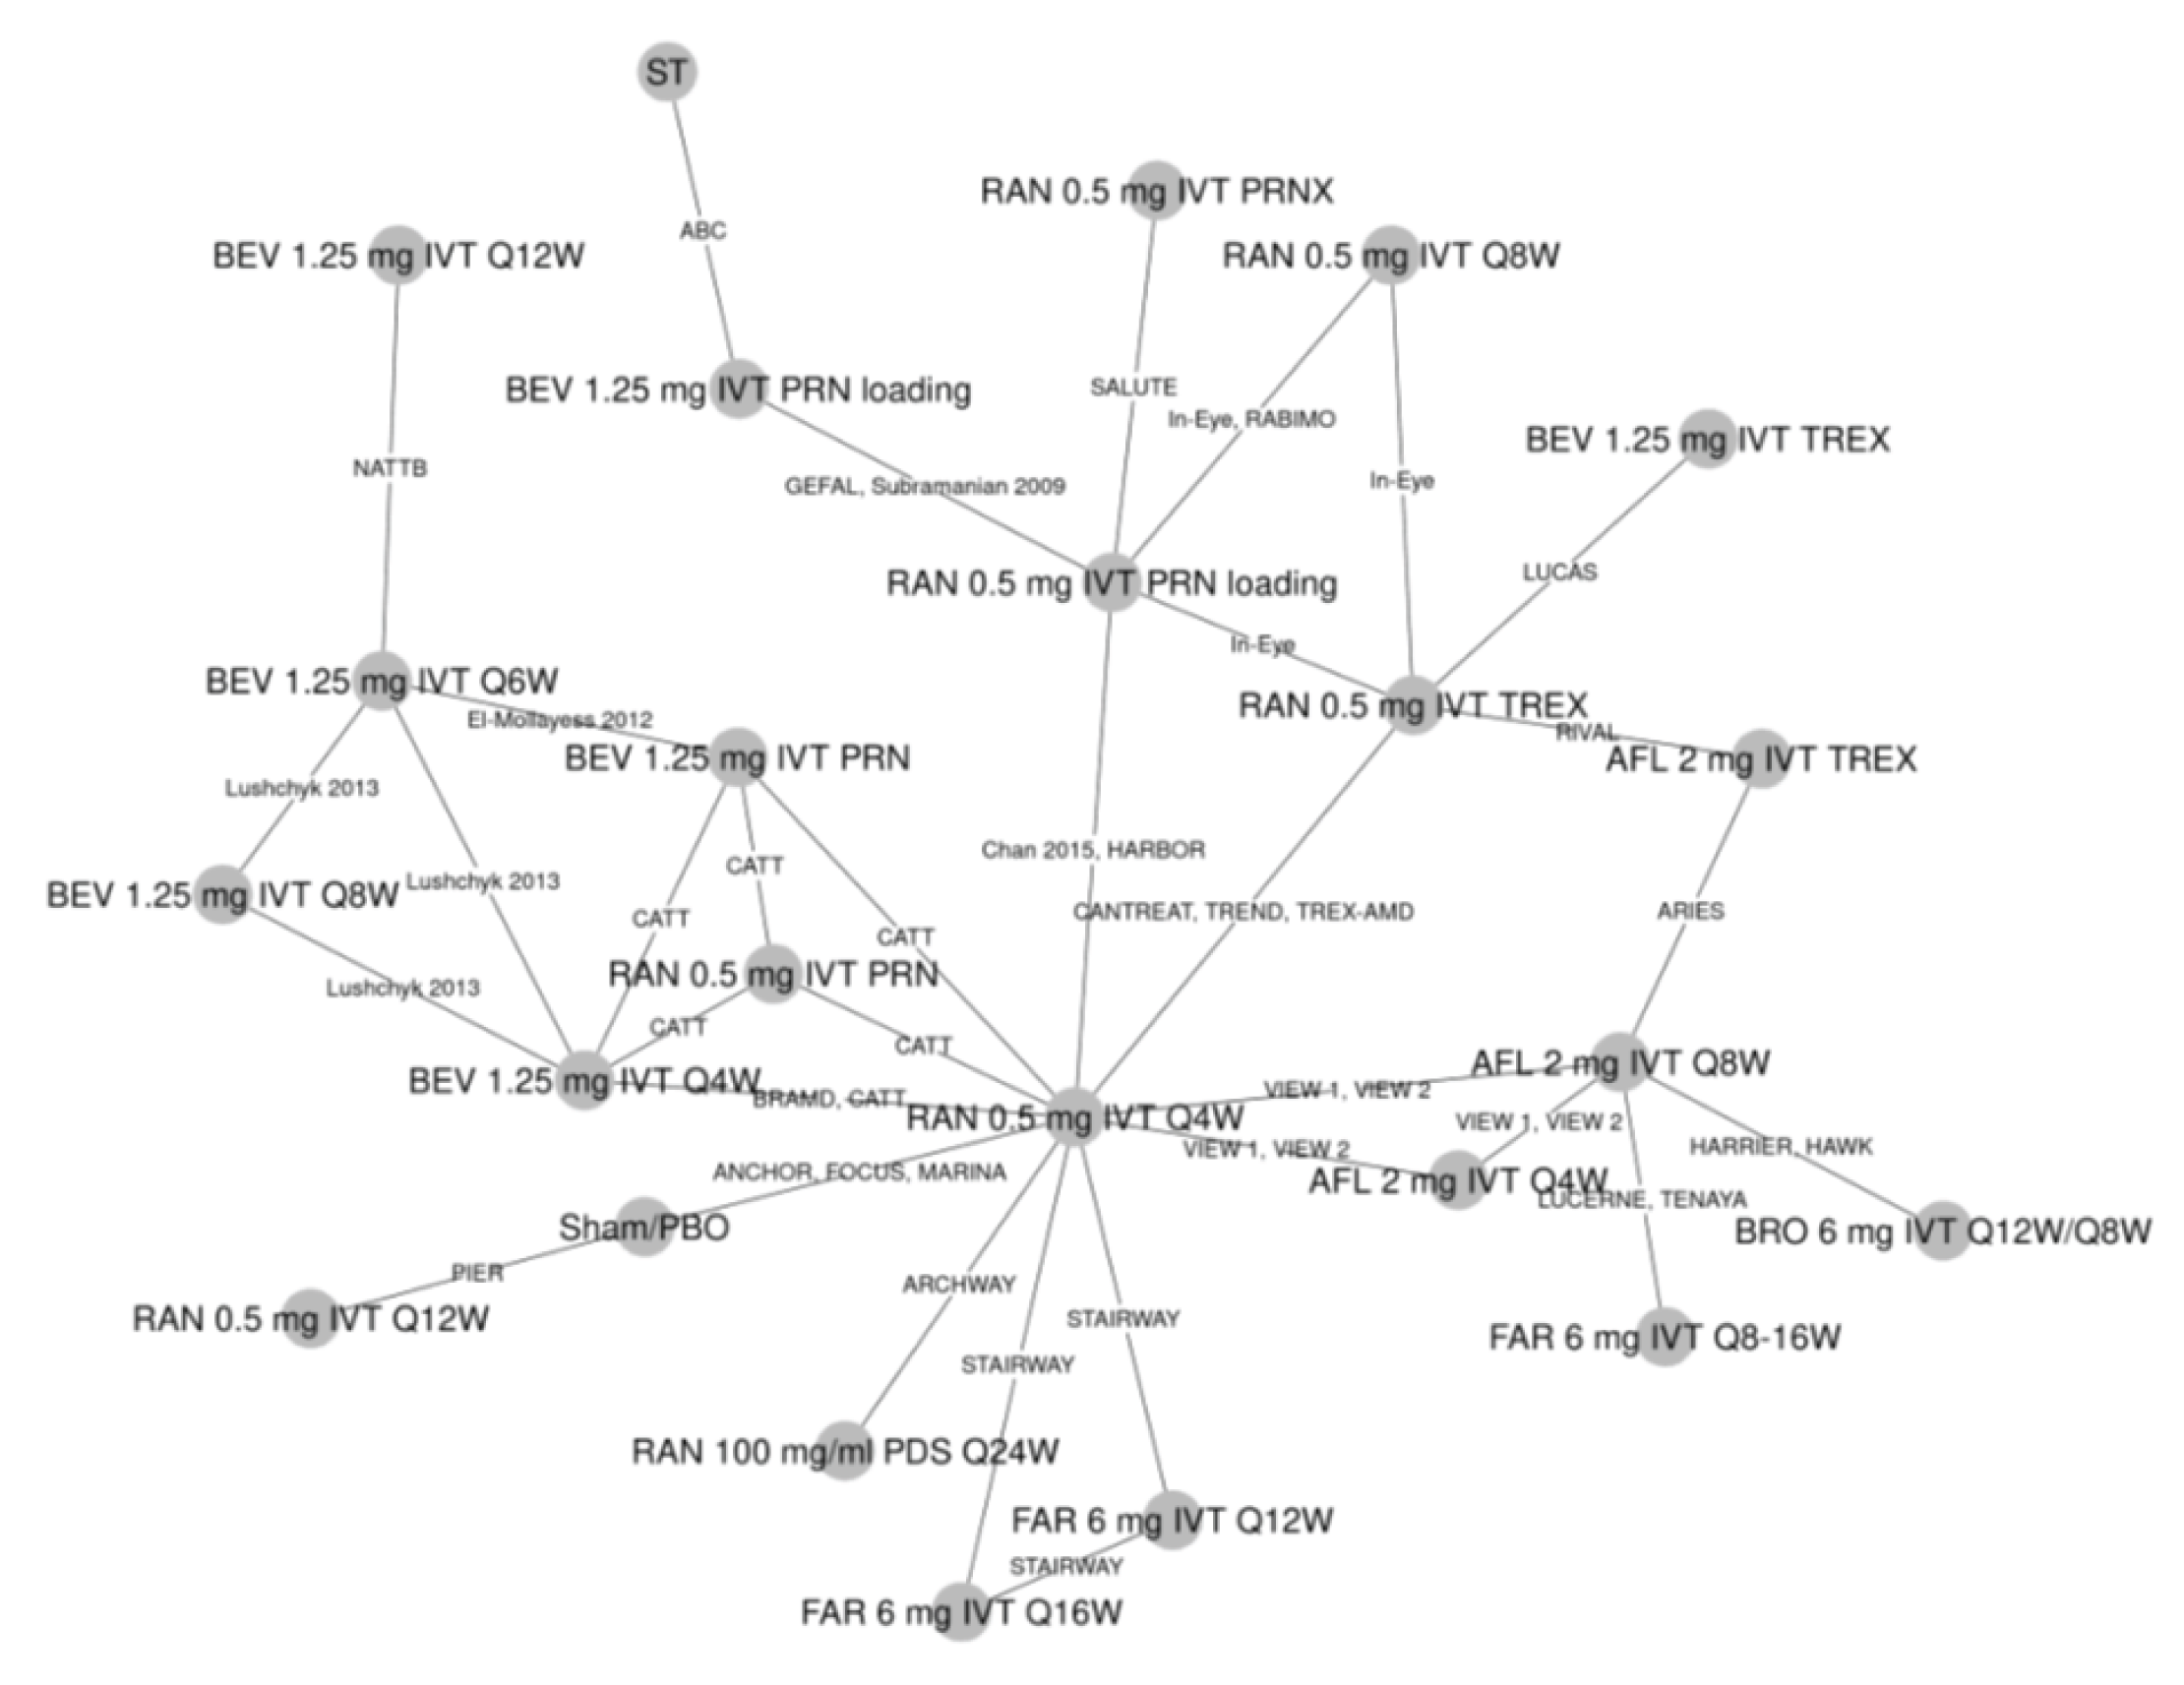 31 trials reported on the outcome of patients gaining or losing at least 10 or 15 EDTRS letters at 12 months and were connected in a network. There are several connected star diagrams with 5 or more connections: RAN 0.5 mg IVT every 4 weeks, AFL 2 mg IVT every 8 weeks, RAN 0.5 mg IVT TREX, and RAN 0.5 mg IVT PRN loading. The most common connection was ranibizumab 0.5 mg IVT every 4 weeks. Faricimab was connected to aflibercept through the TENAYA and LUCERNE trials and connected to ranibizumab 0.5 mg IVT every 4 weeks through the STAIRWAY trial.